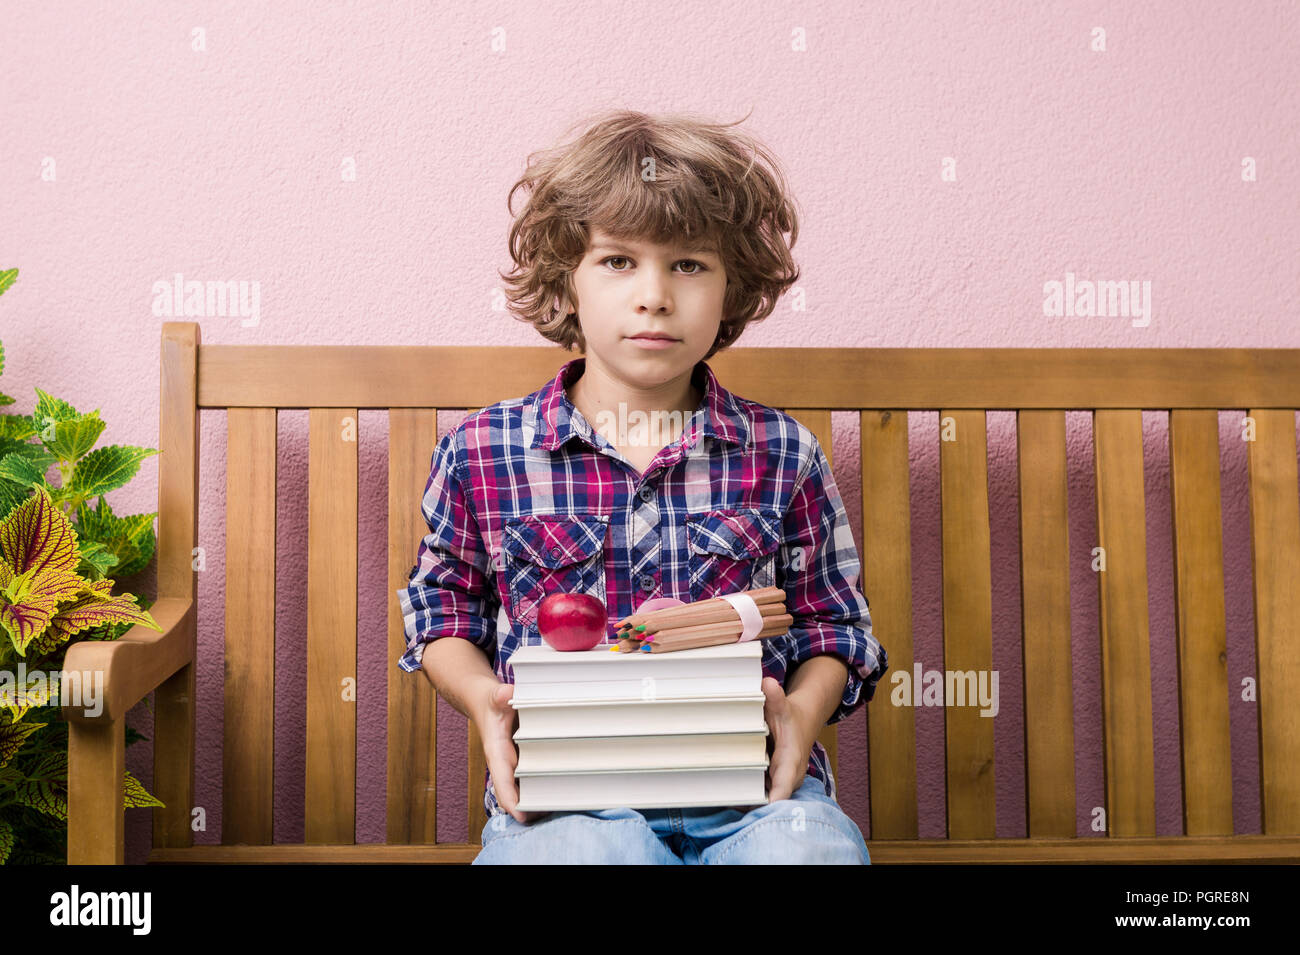 Little boy holding stack of books ready to go back to school. Stock Photo